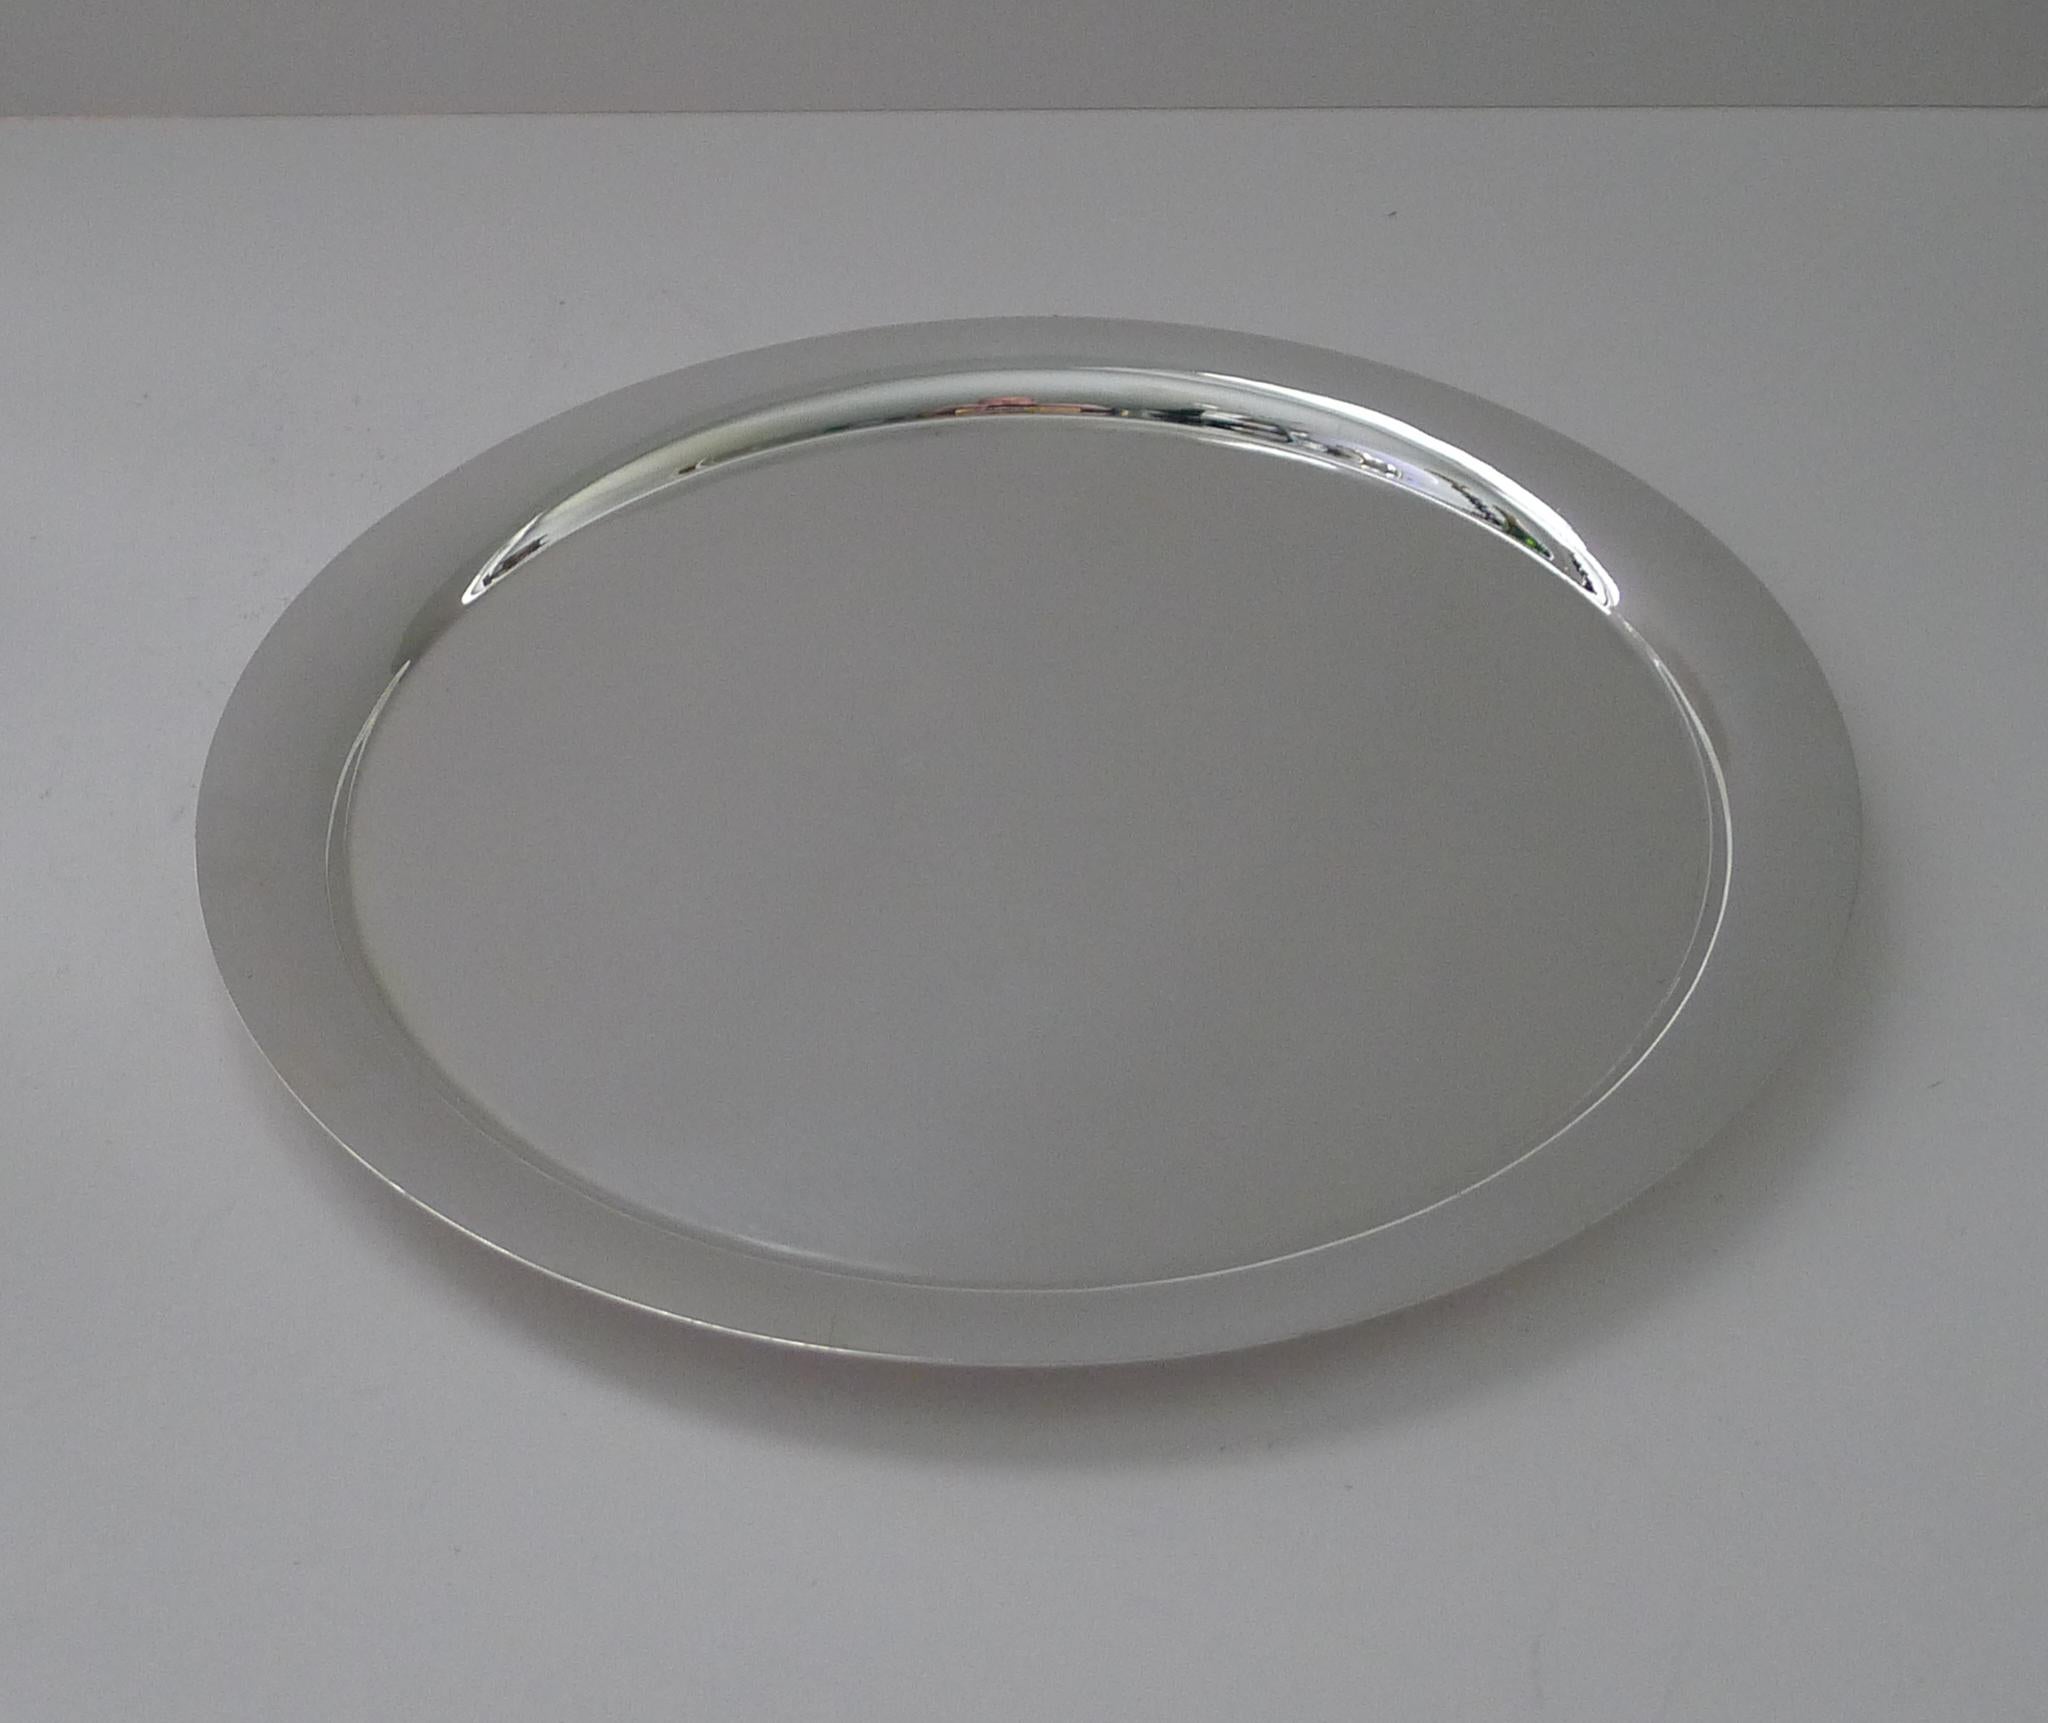 British Asprey, London - Silver Plated Cocktail Tray c.1930 For Sale